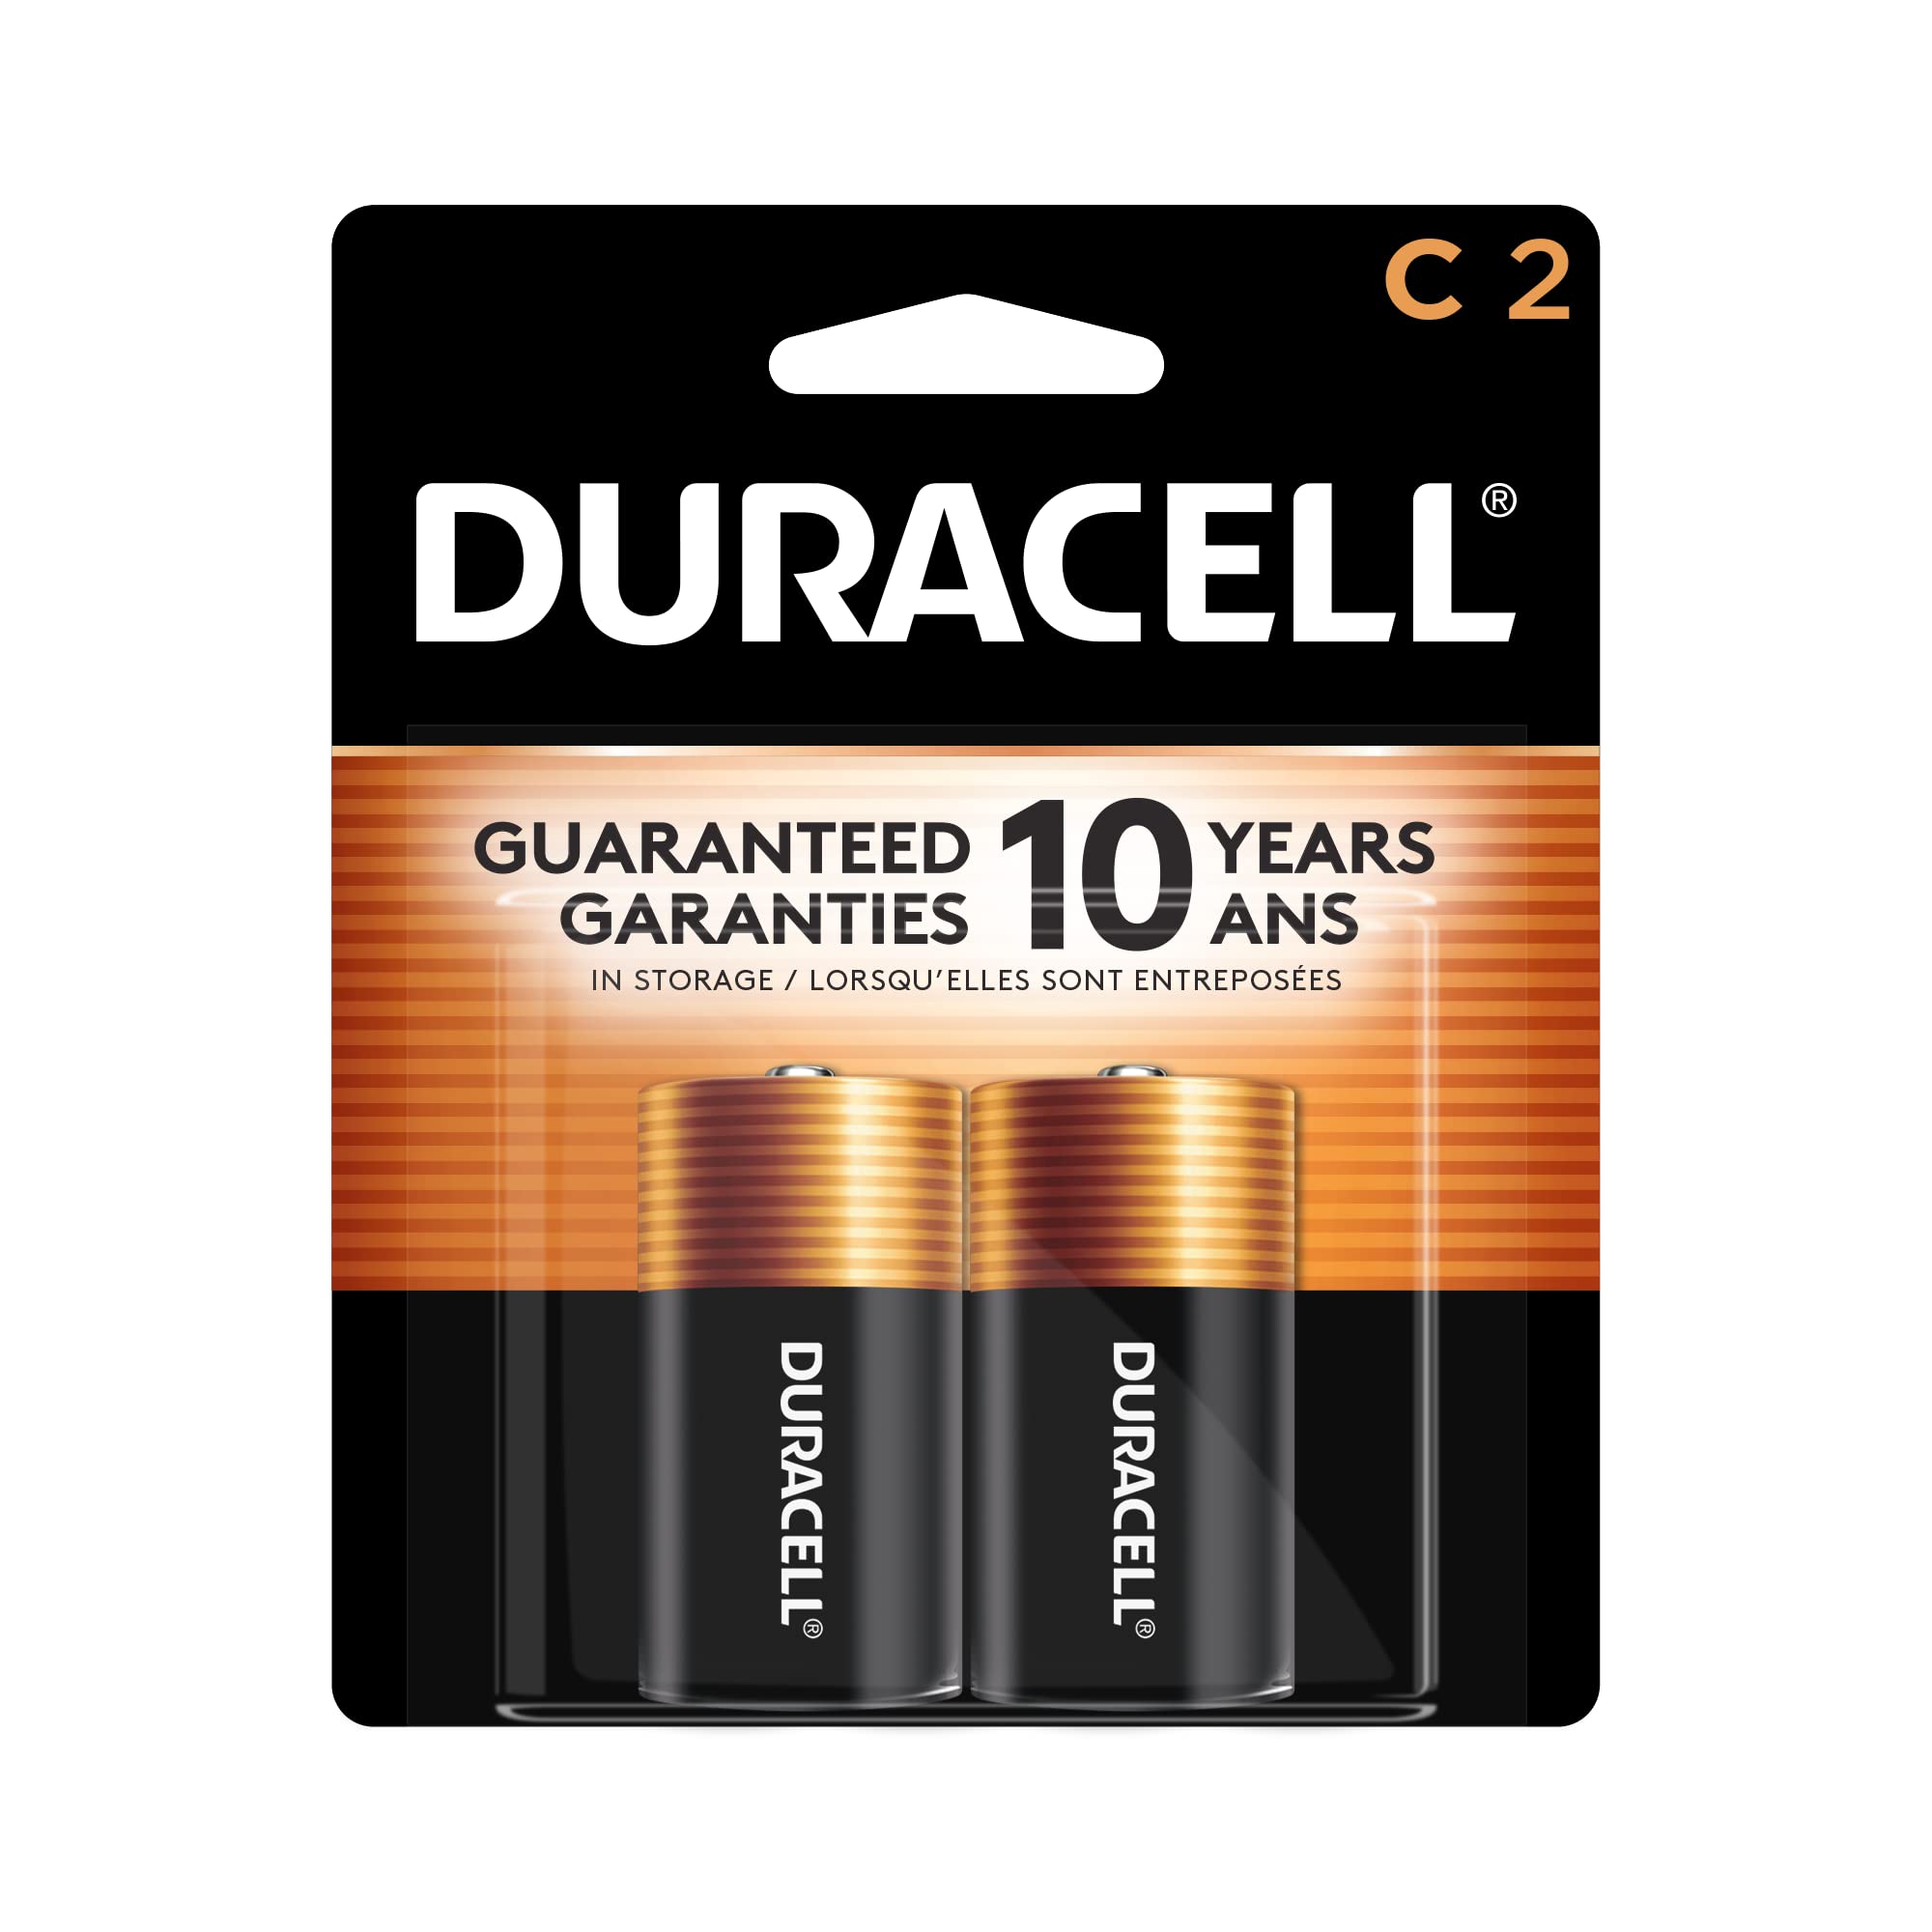 DURACELL Coppertop 1.5V Size C Alkaline Battery, (Pack of 8) - image 1 of 5